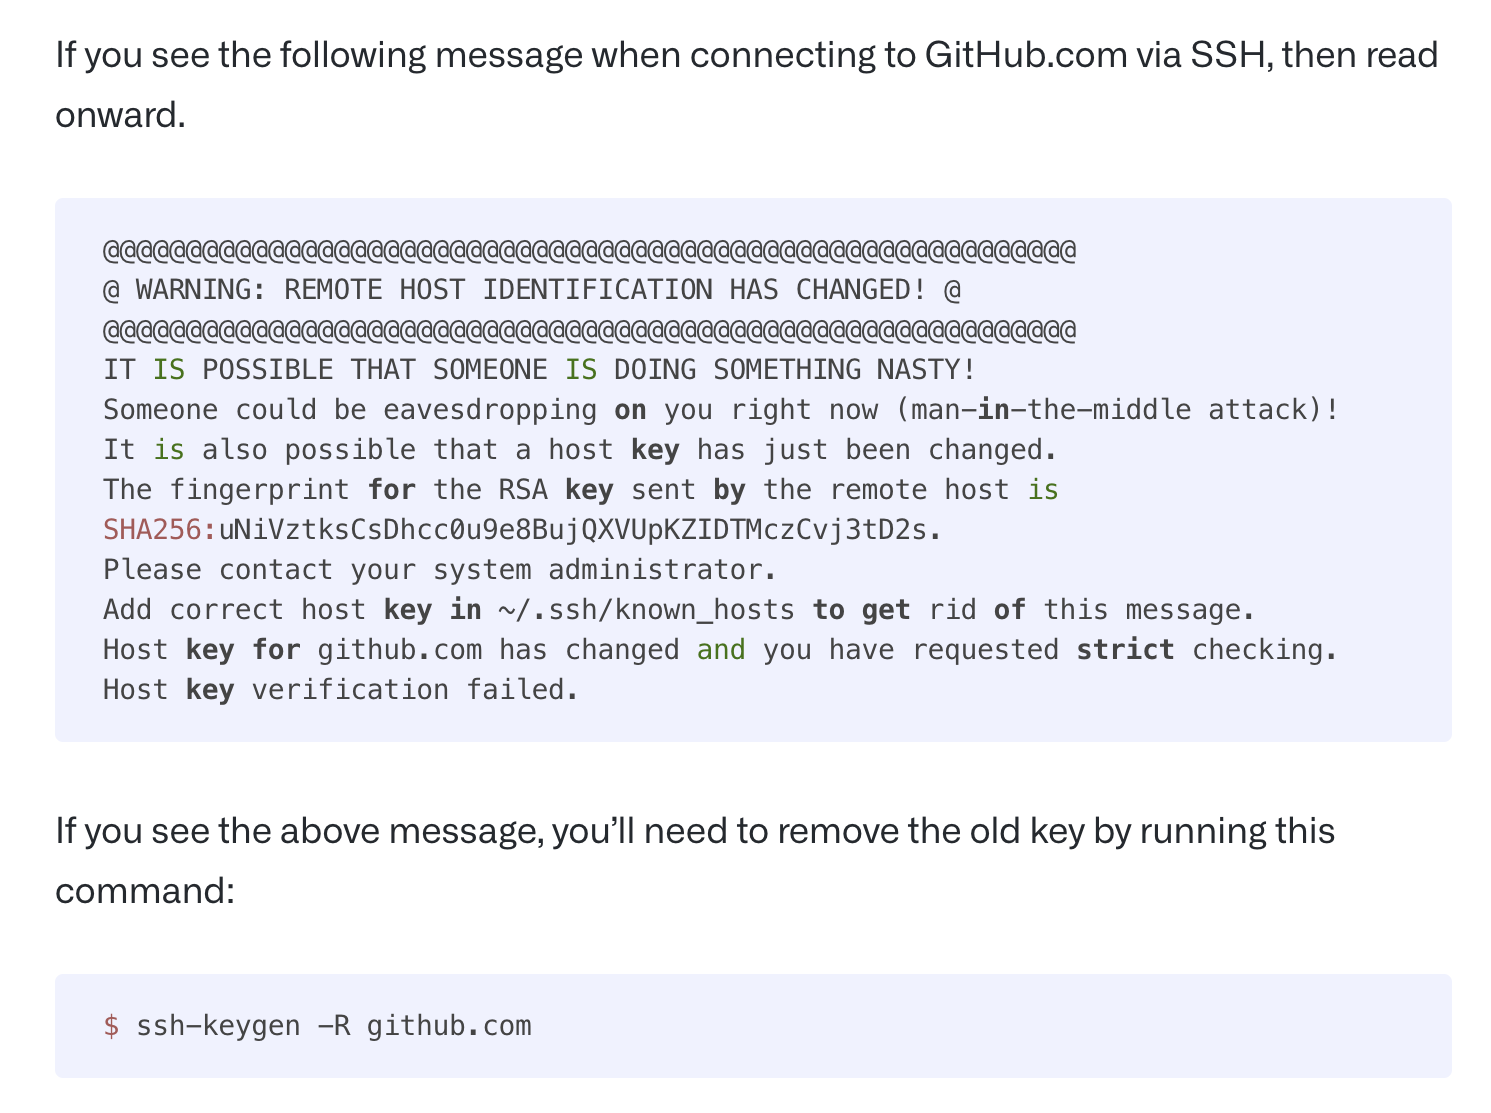 If you see the following message when connecting to GitHub.com via SSH, then read onward. with code snippet